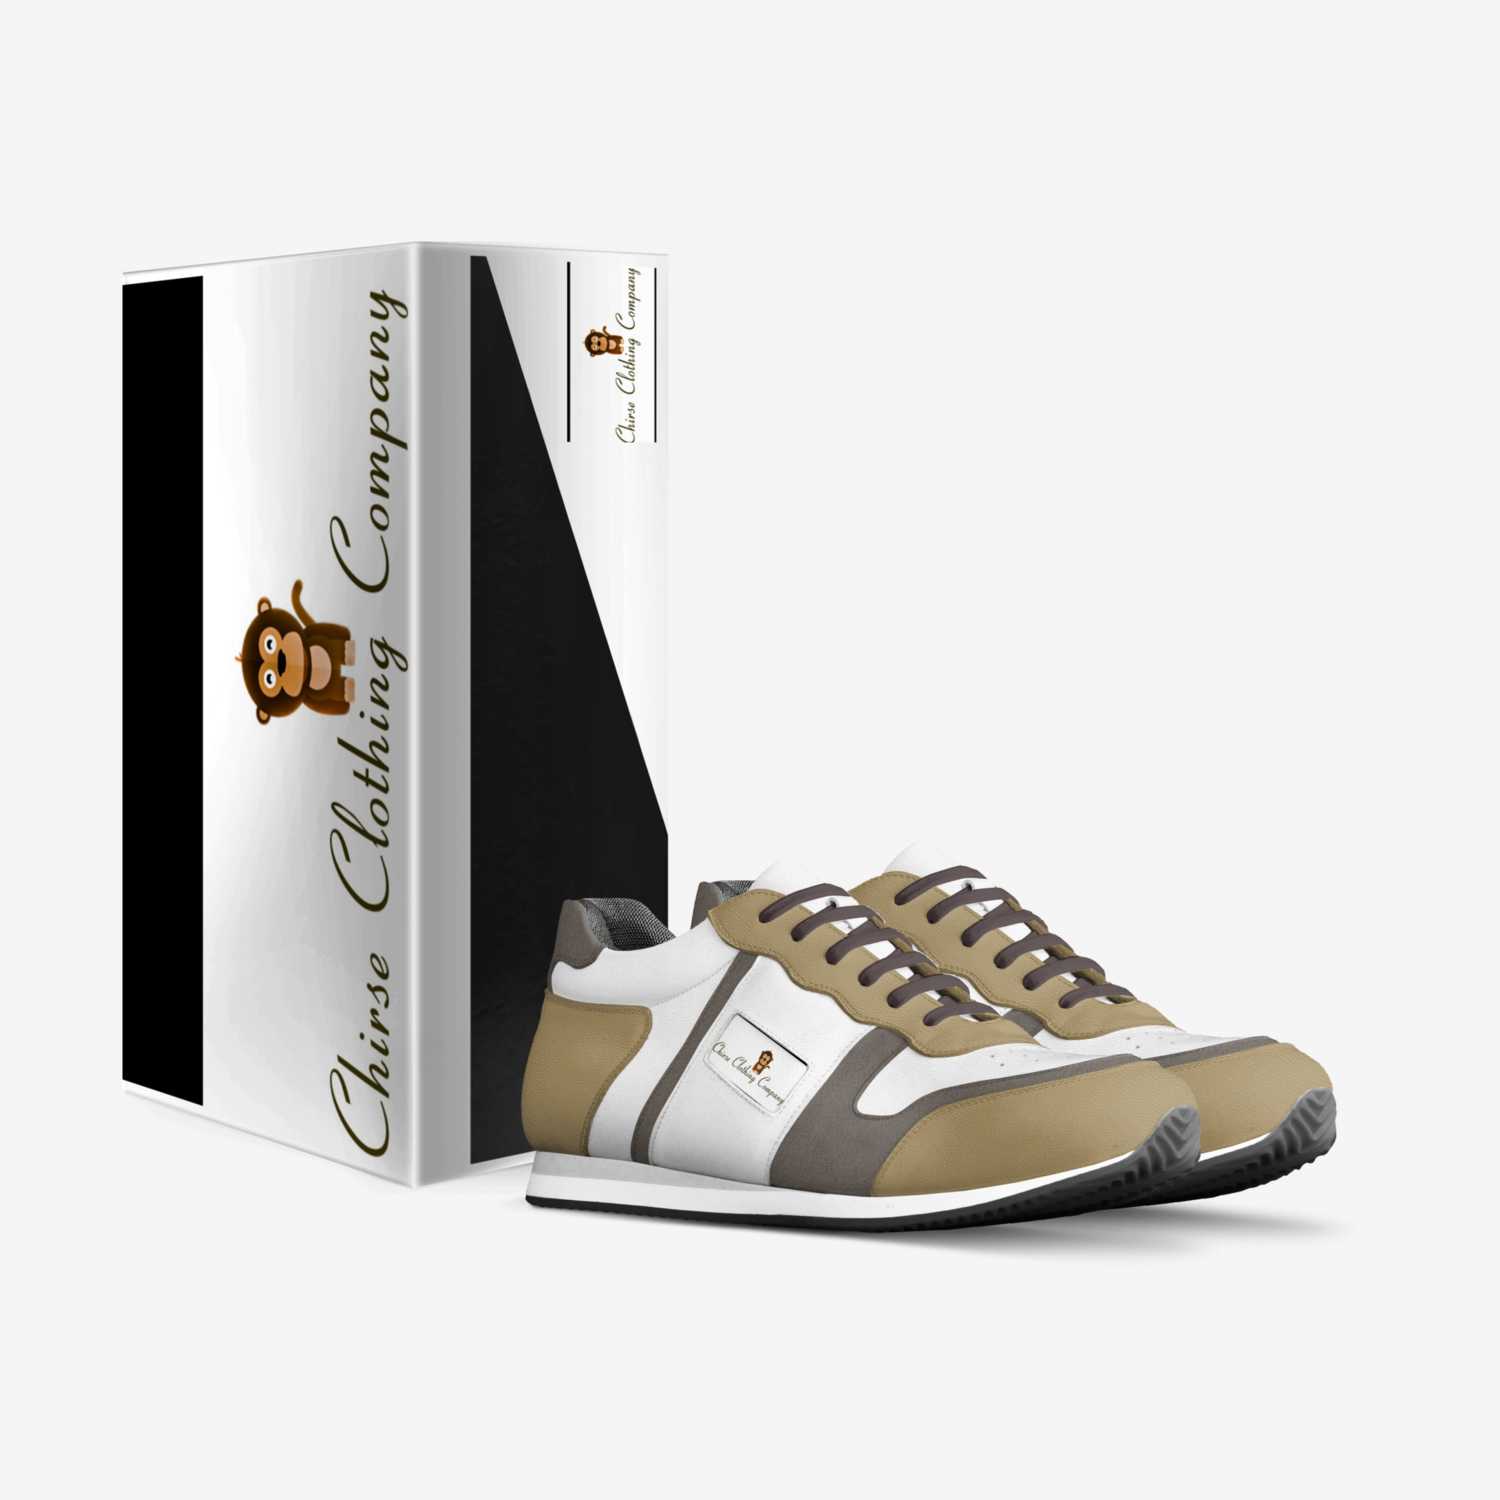 Chirse Clothing Co custom made in Italy shoes by Harold Chirse | Box view